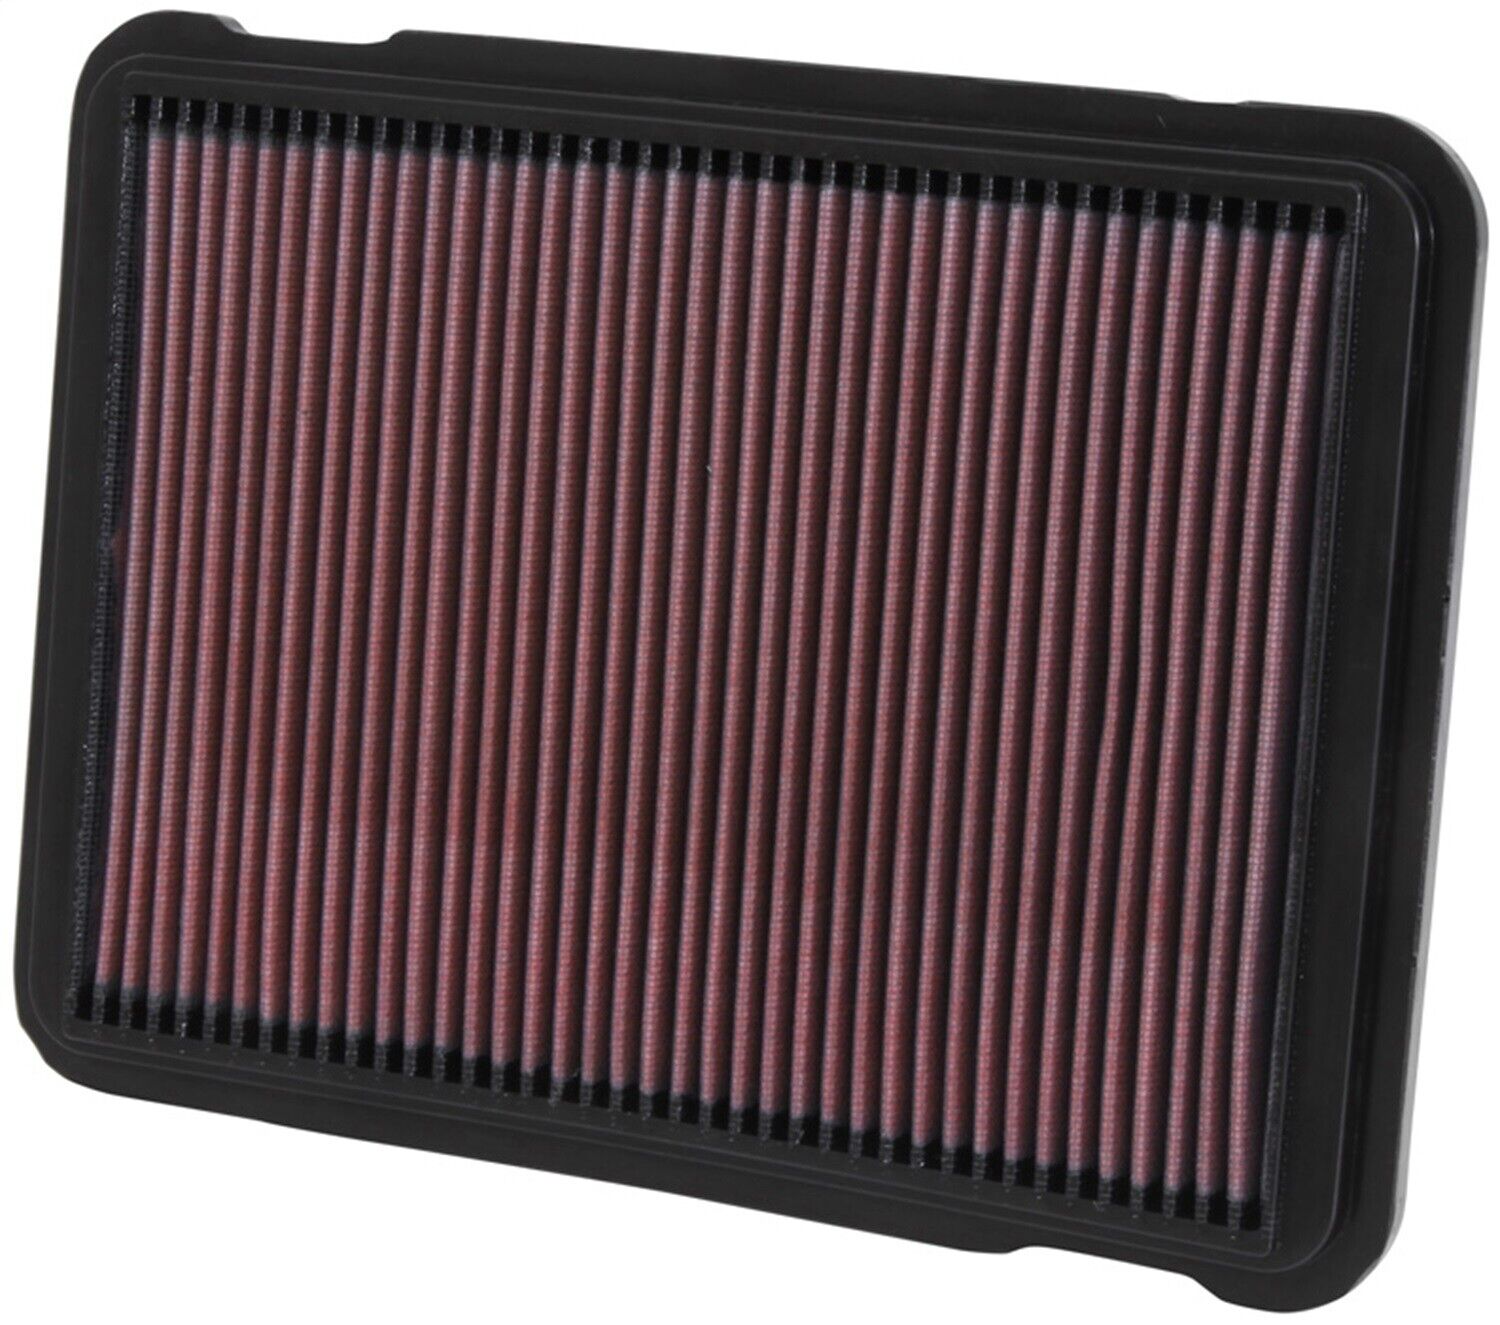 K&N Filters 33-2146 Air Filter Fits 98-07 Land Cruiser LX470